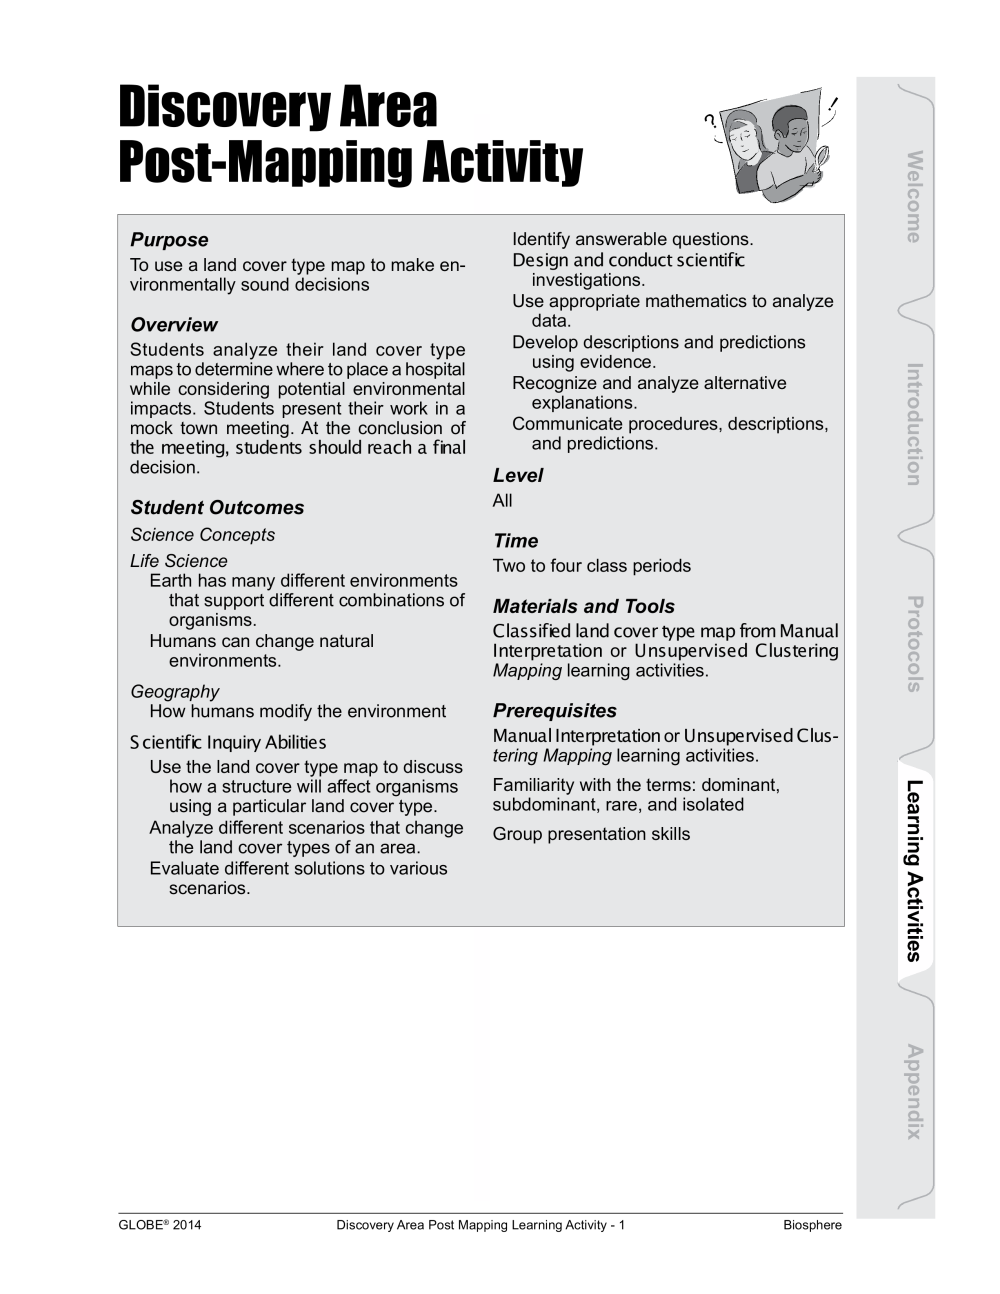 Learning Activities preview for Discovery Area Post-Protocol